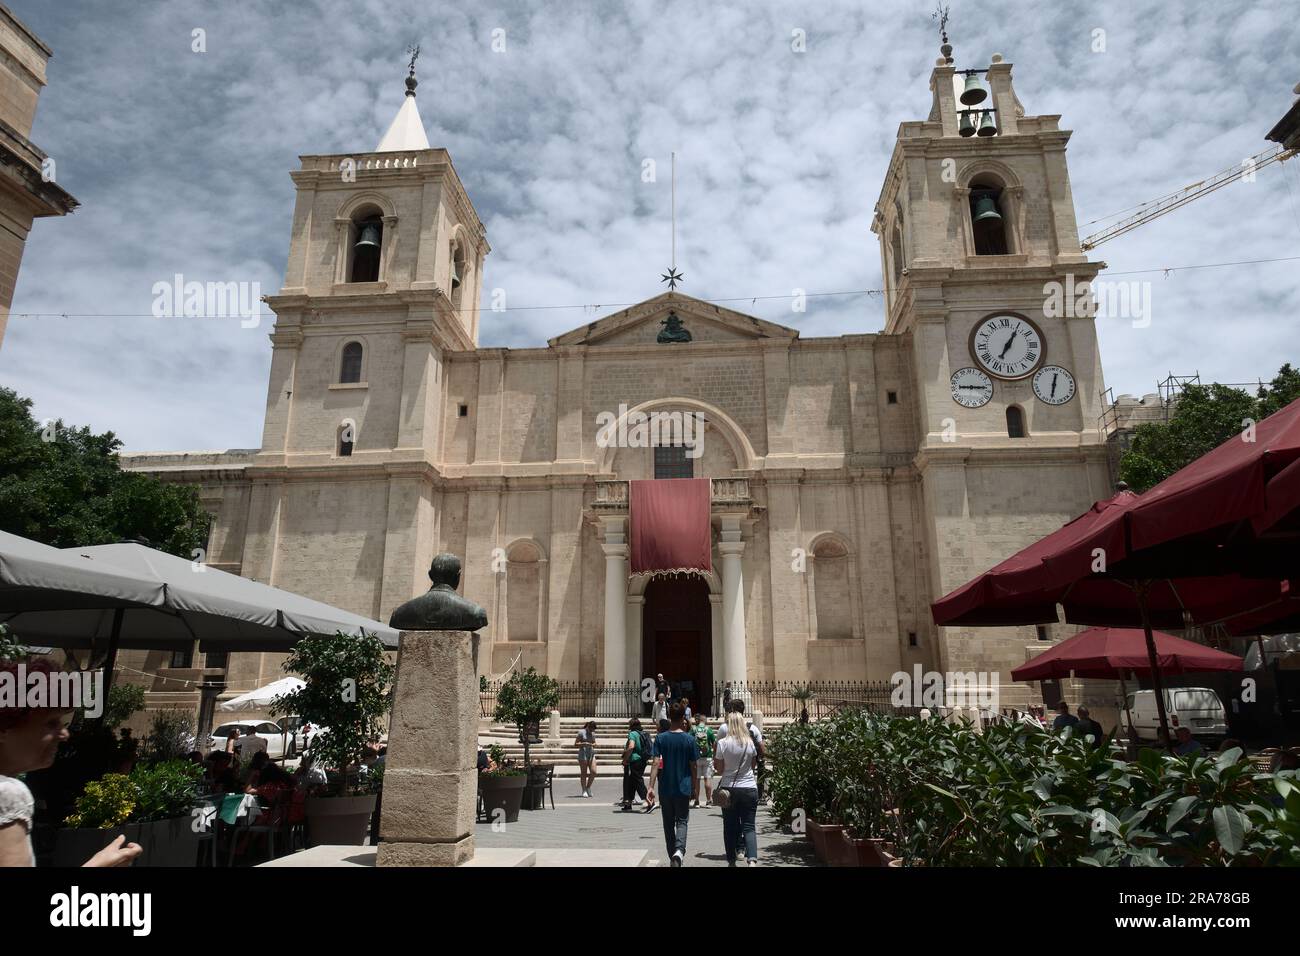 St John's Square and St. John’s Co-Cathedral in Valletta, Malta Stock Photo